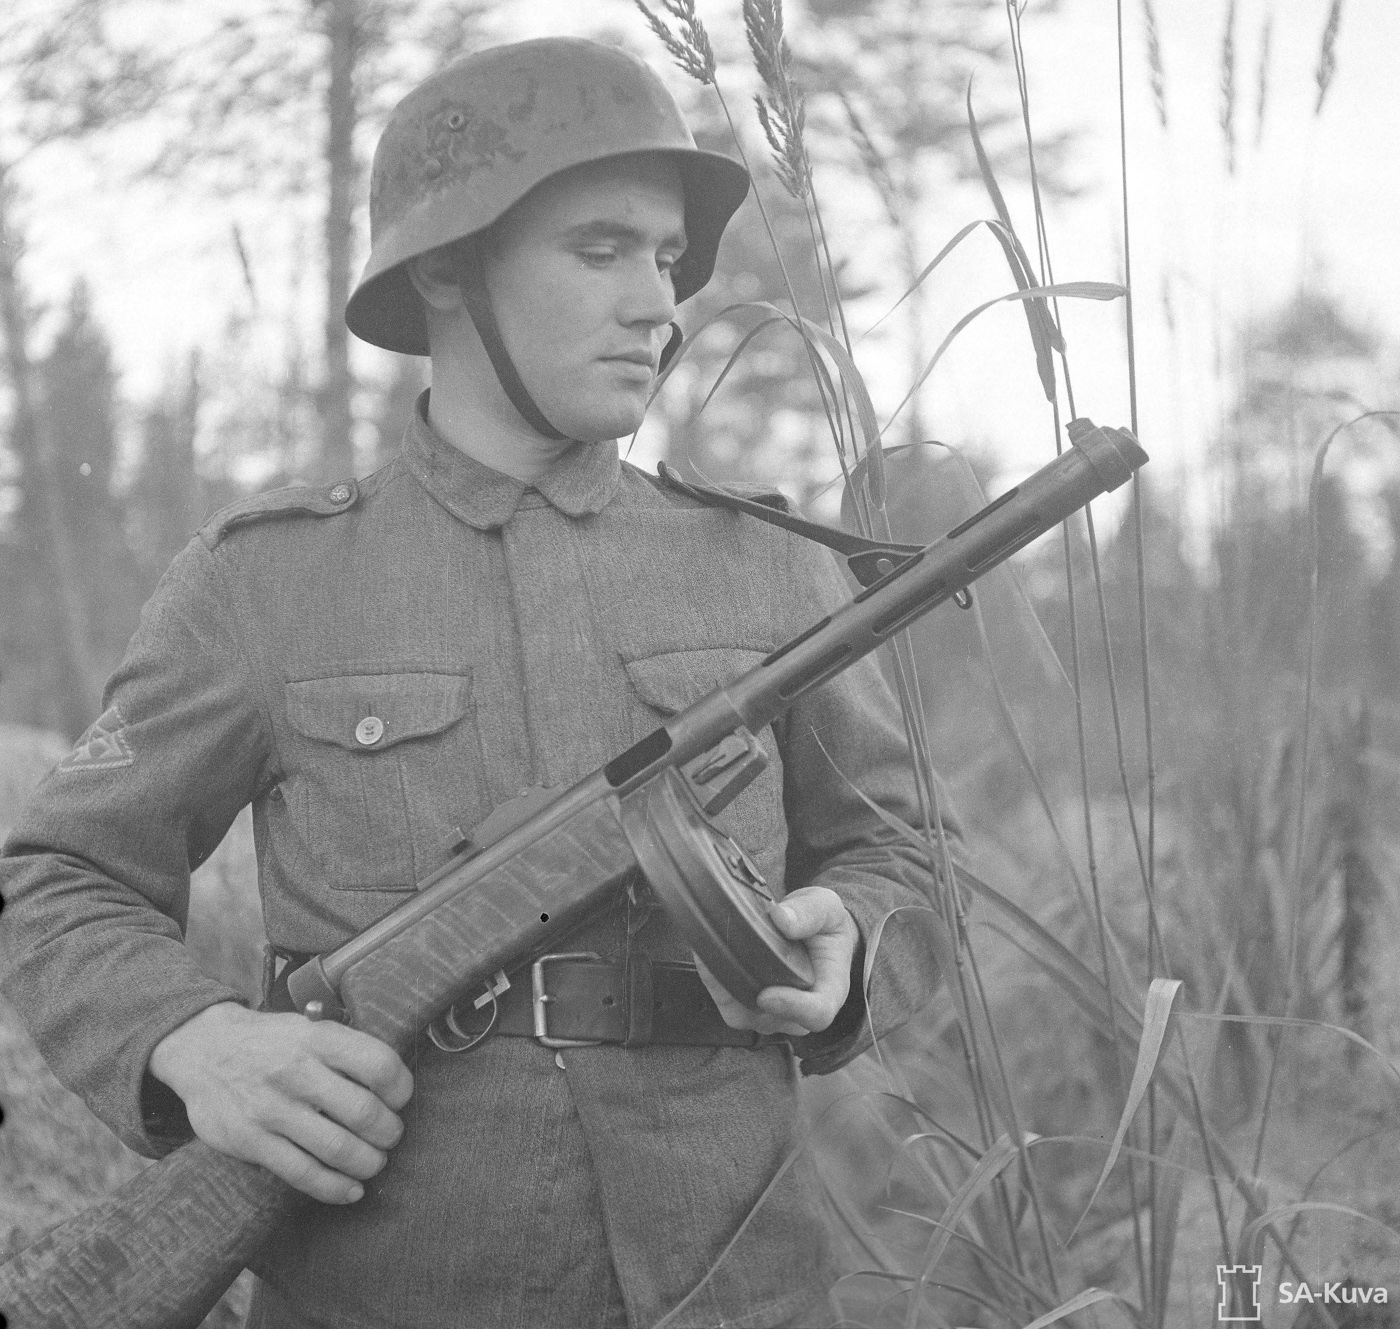 finnish soldier in continuation war armed with 9mm suomi smg 71 round magazine vented barrel